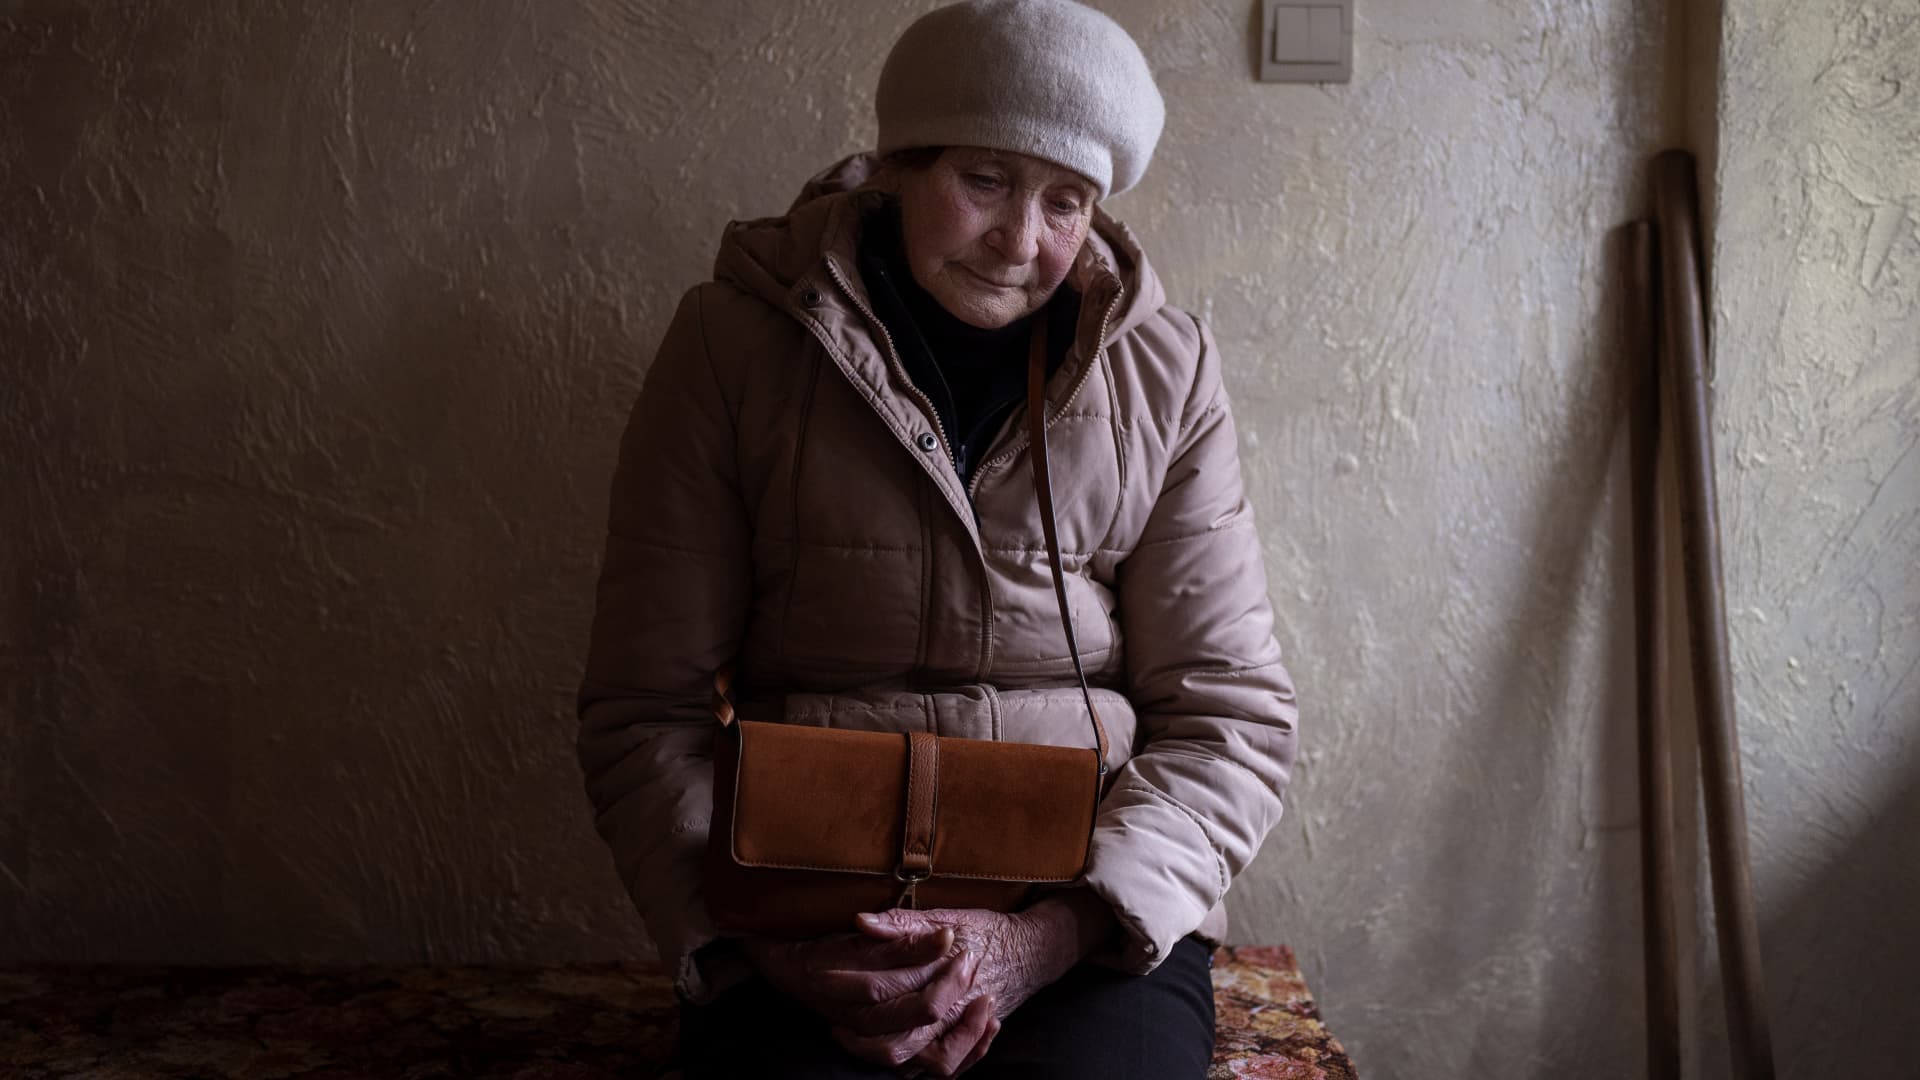 Nina, 77, waits her turn inside a church to receive humanitarian aid donated by European Union in Bucha, on the outskirts of Kyiv, Tuesday, April 19, 2022. Citizens of Bucha are still without electricity, water and gas after more than 44 days since the Russian invasion began.